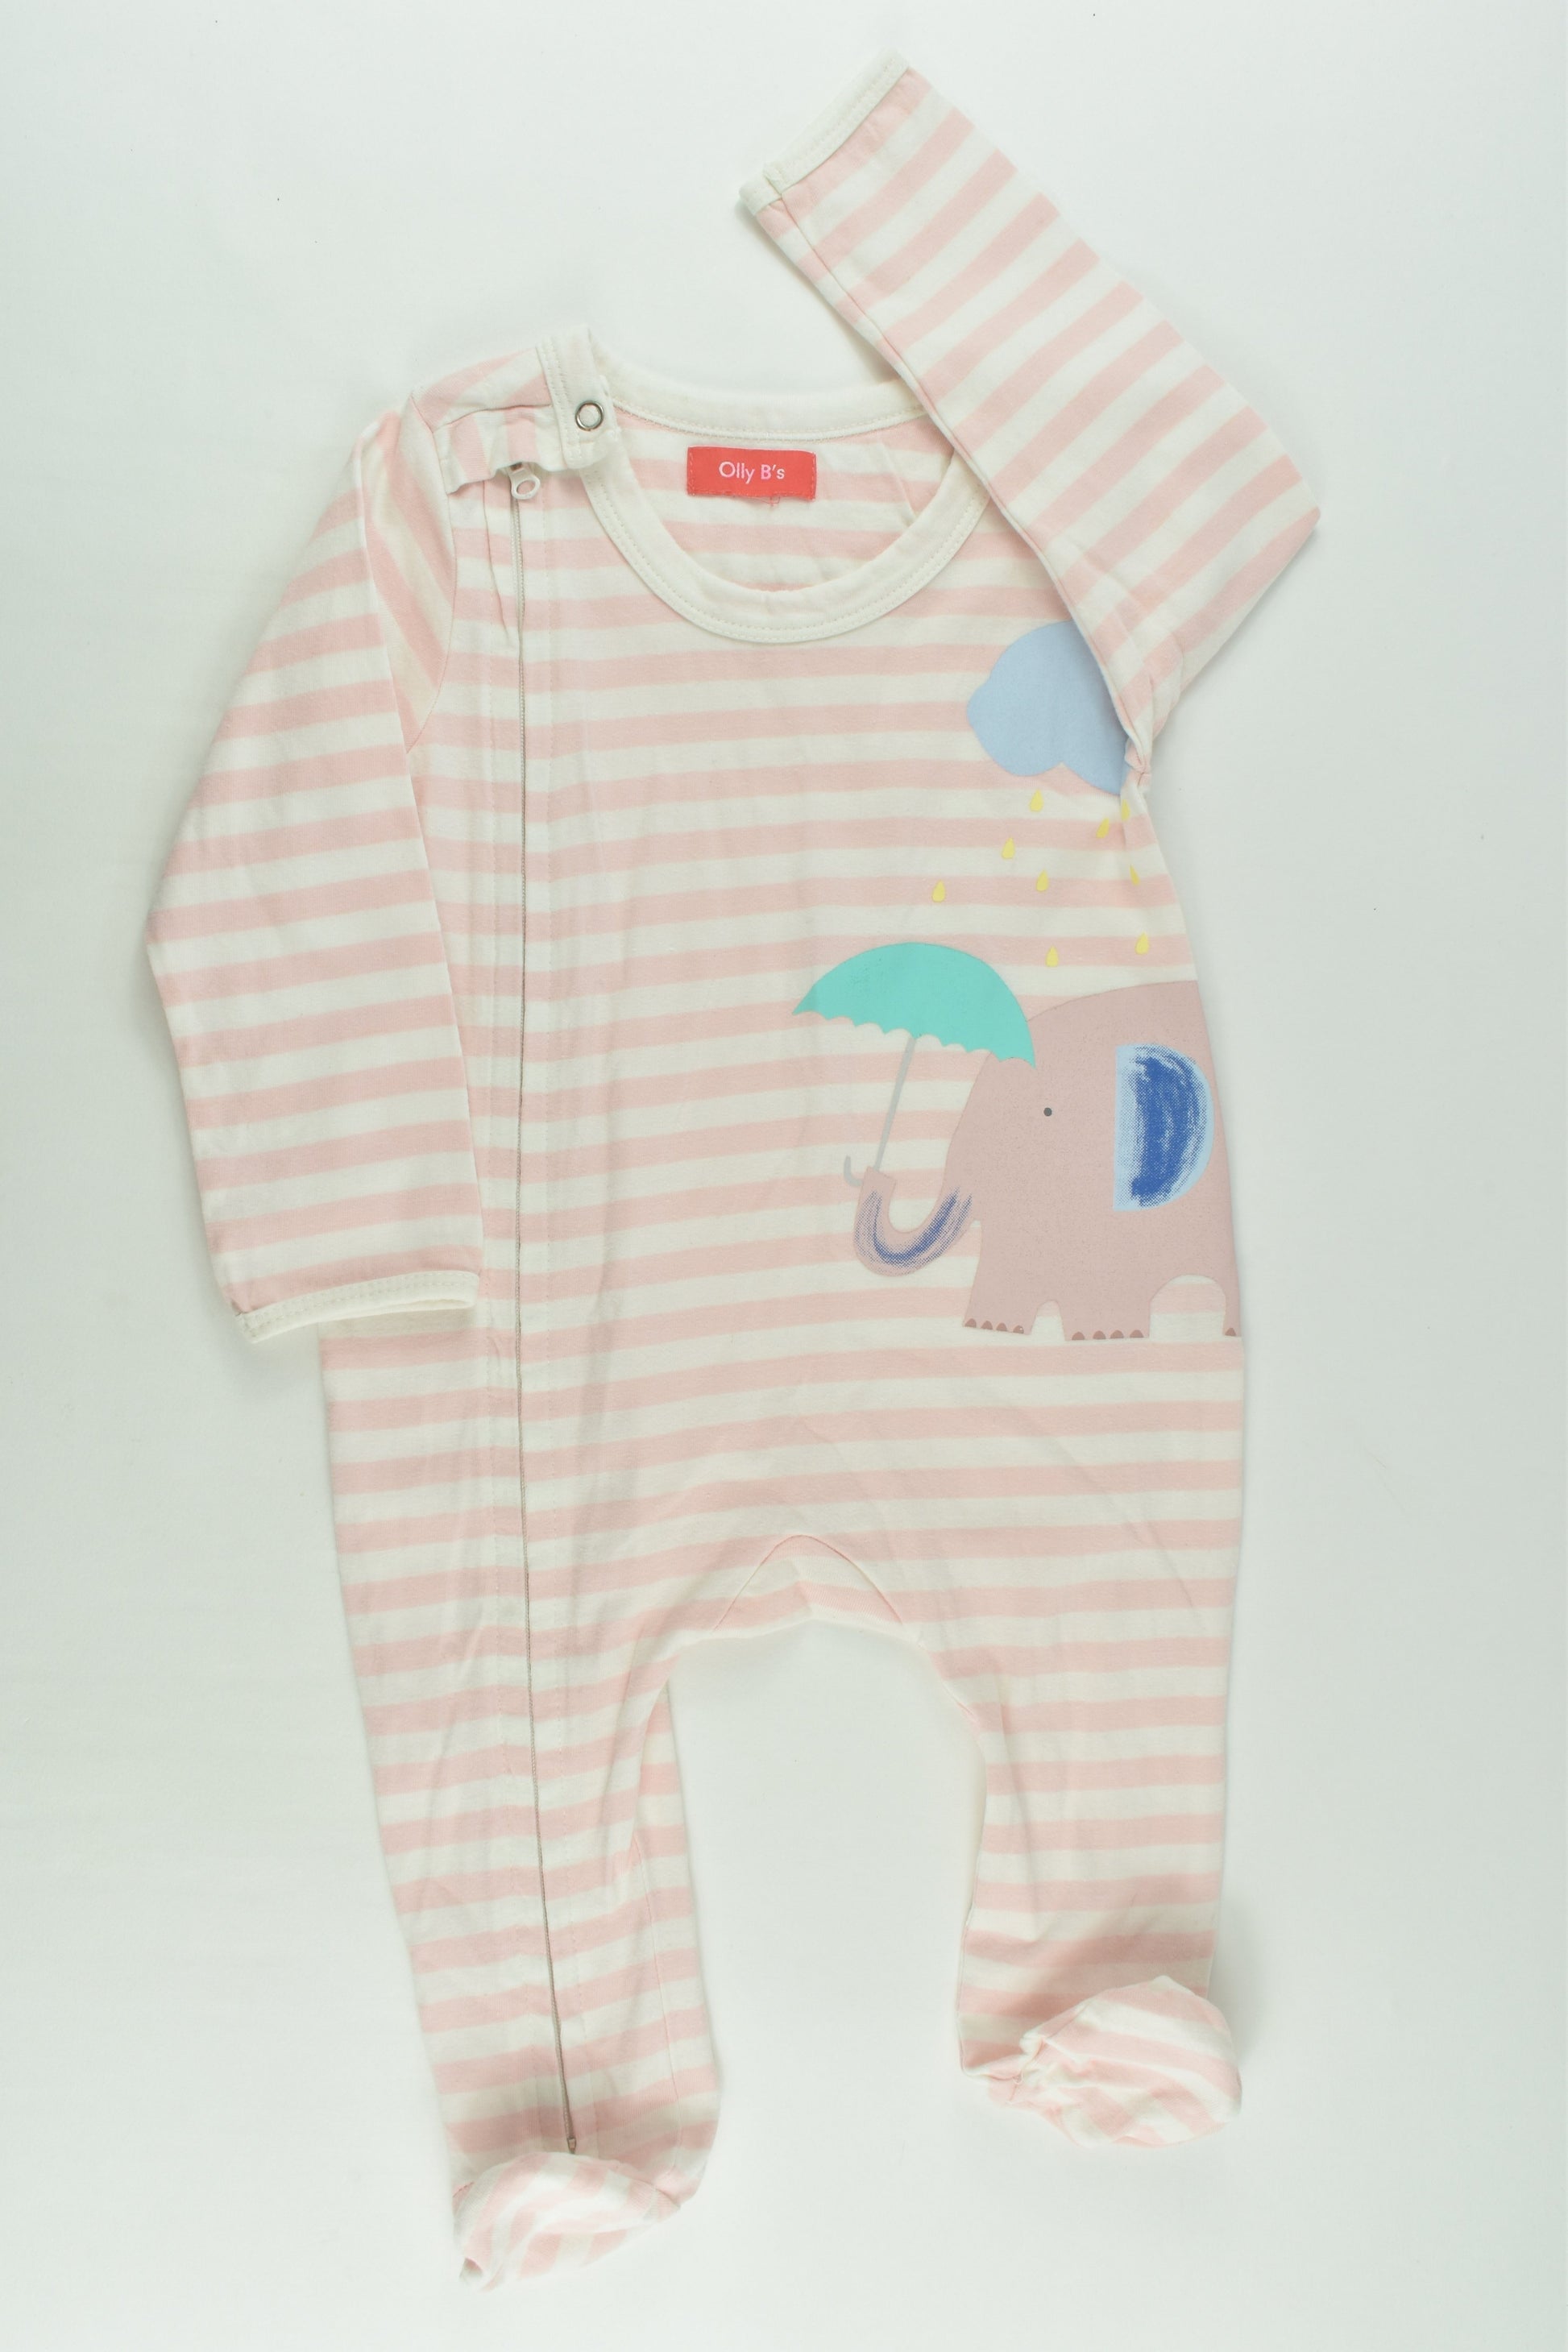 Olly B's Size 0 (6-12 months) Elephant Footed Romper